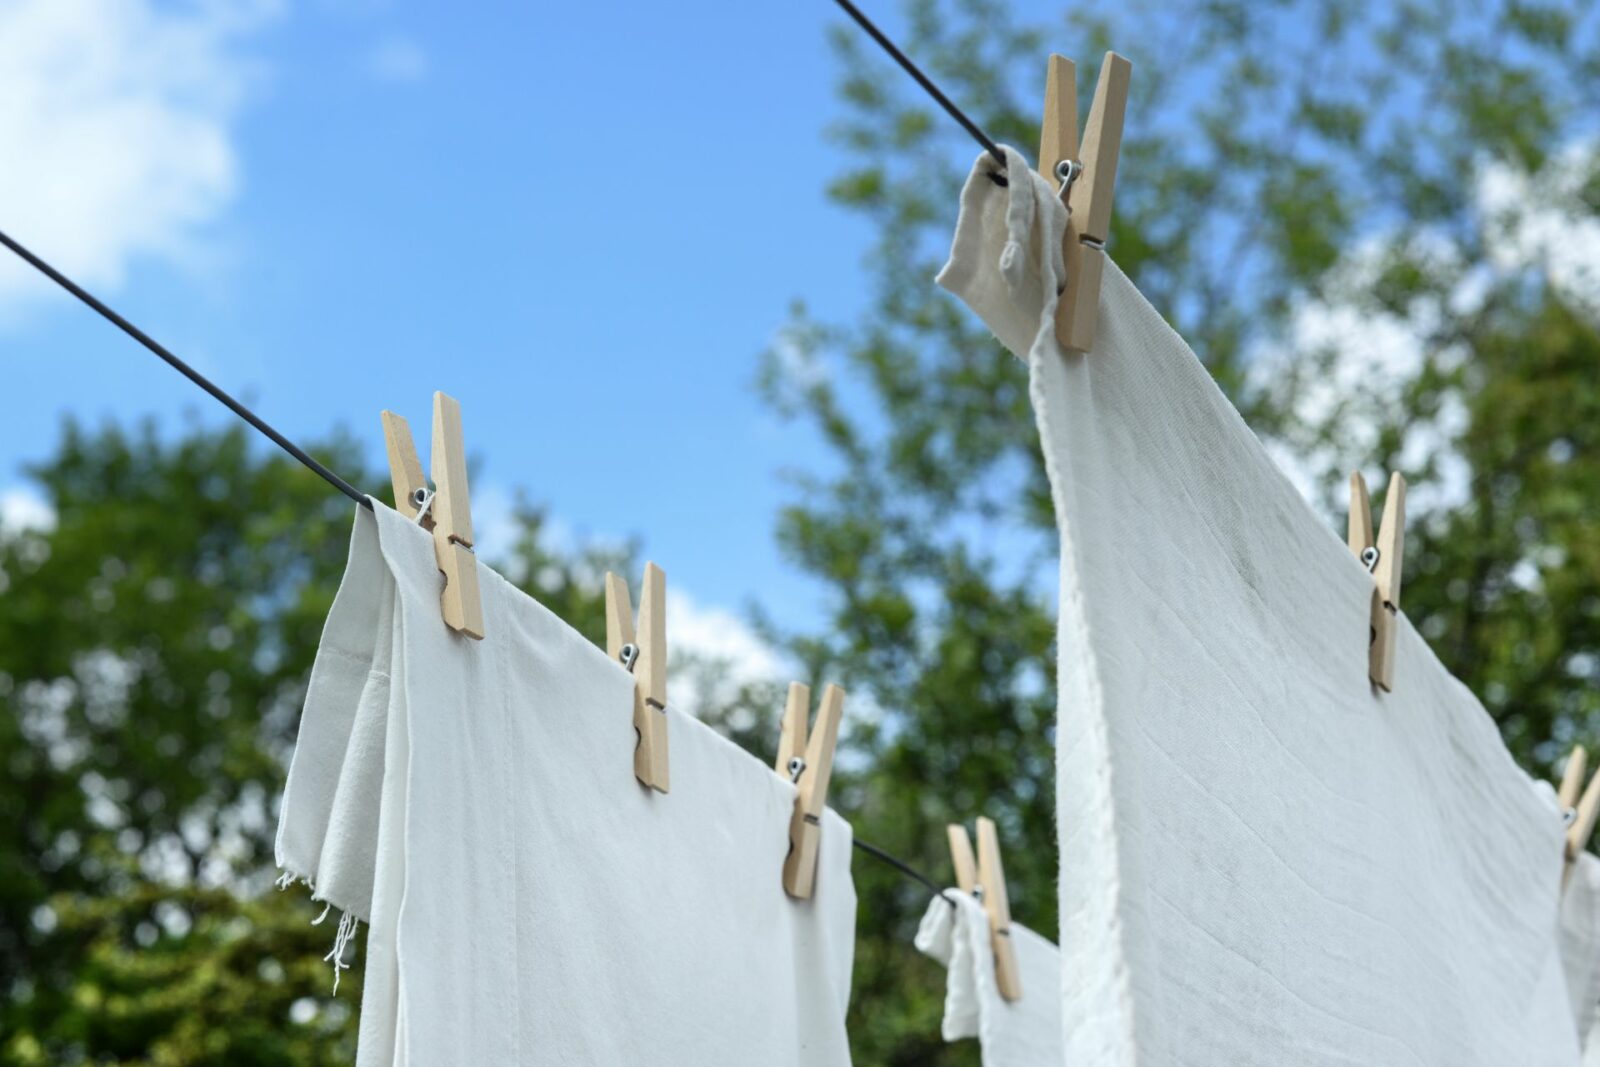 outdoor clothes drying rack